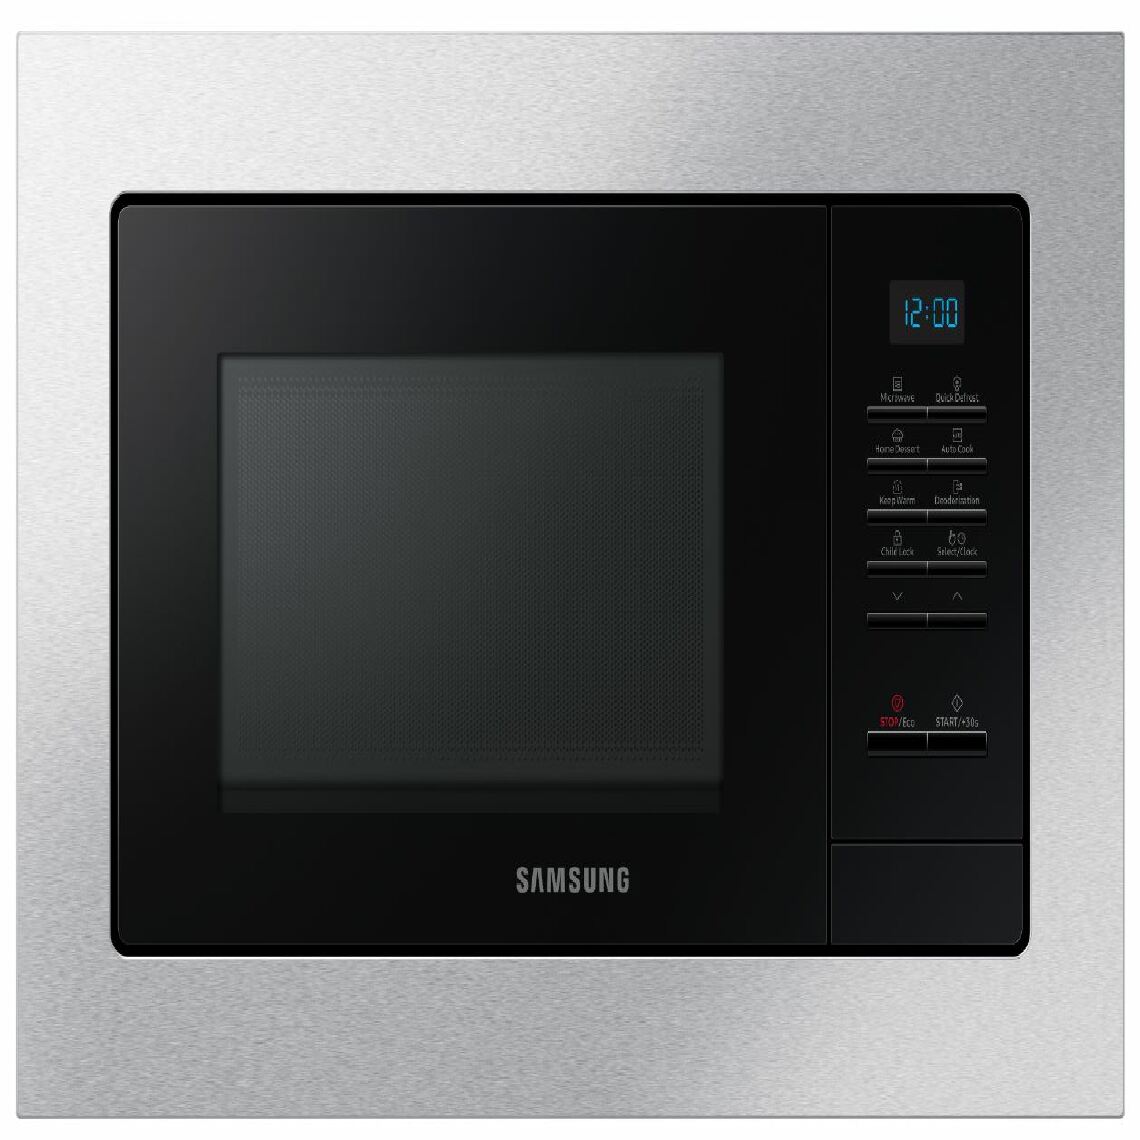 Samsung - samsung - ms20a7013at - Four micro-ondes